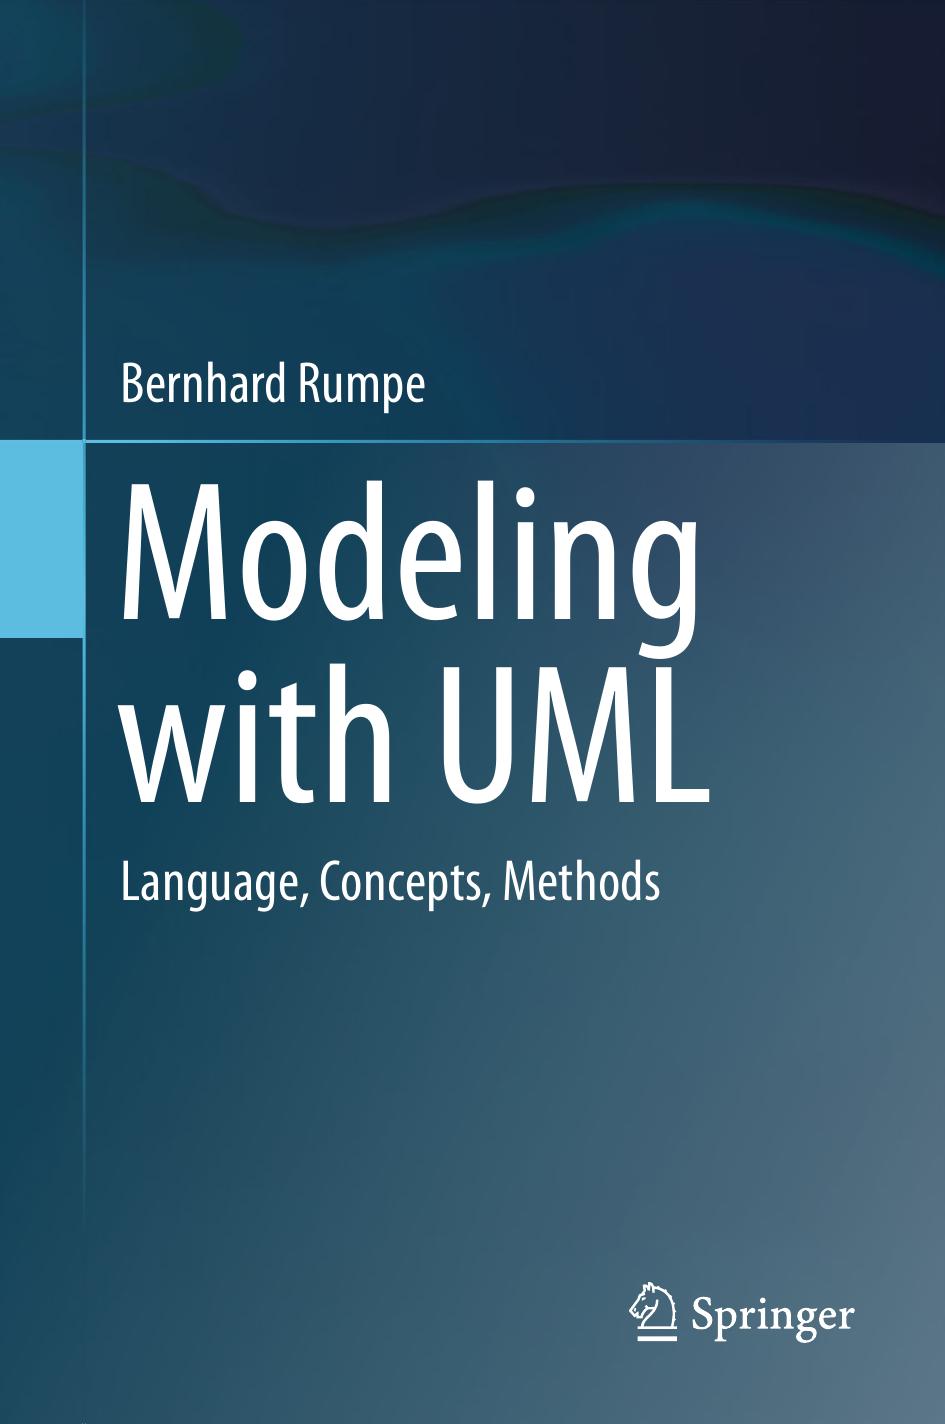 Modeling with UML: Language, Concepts, Methods